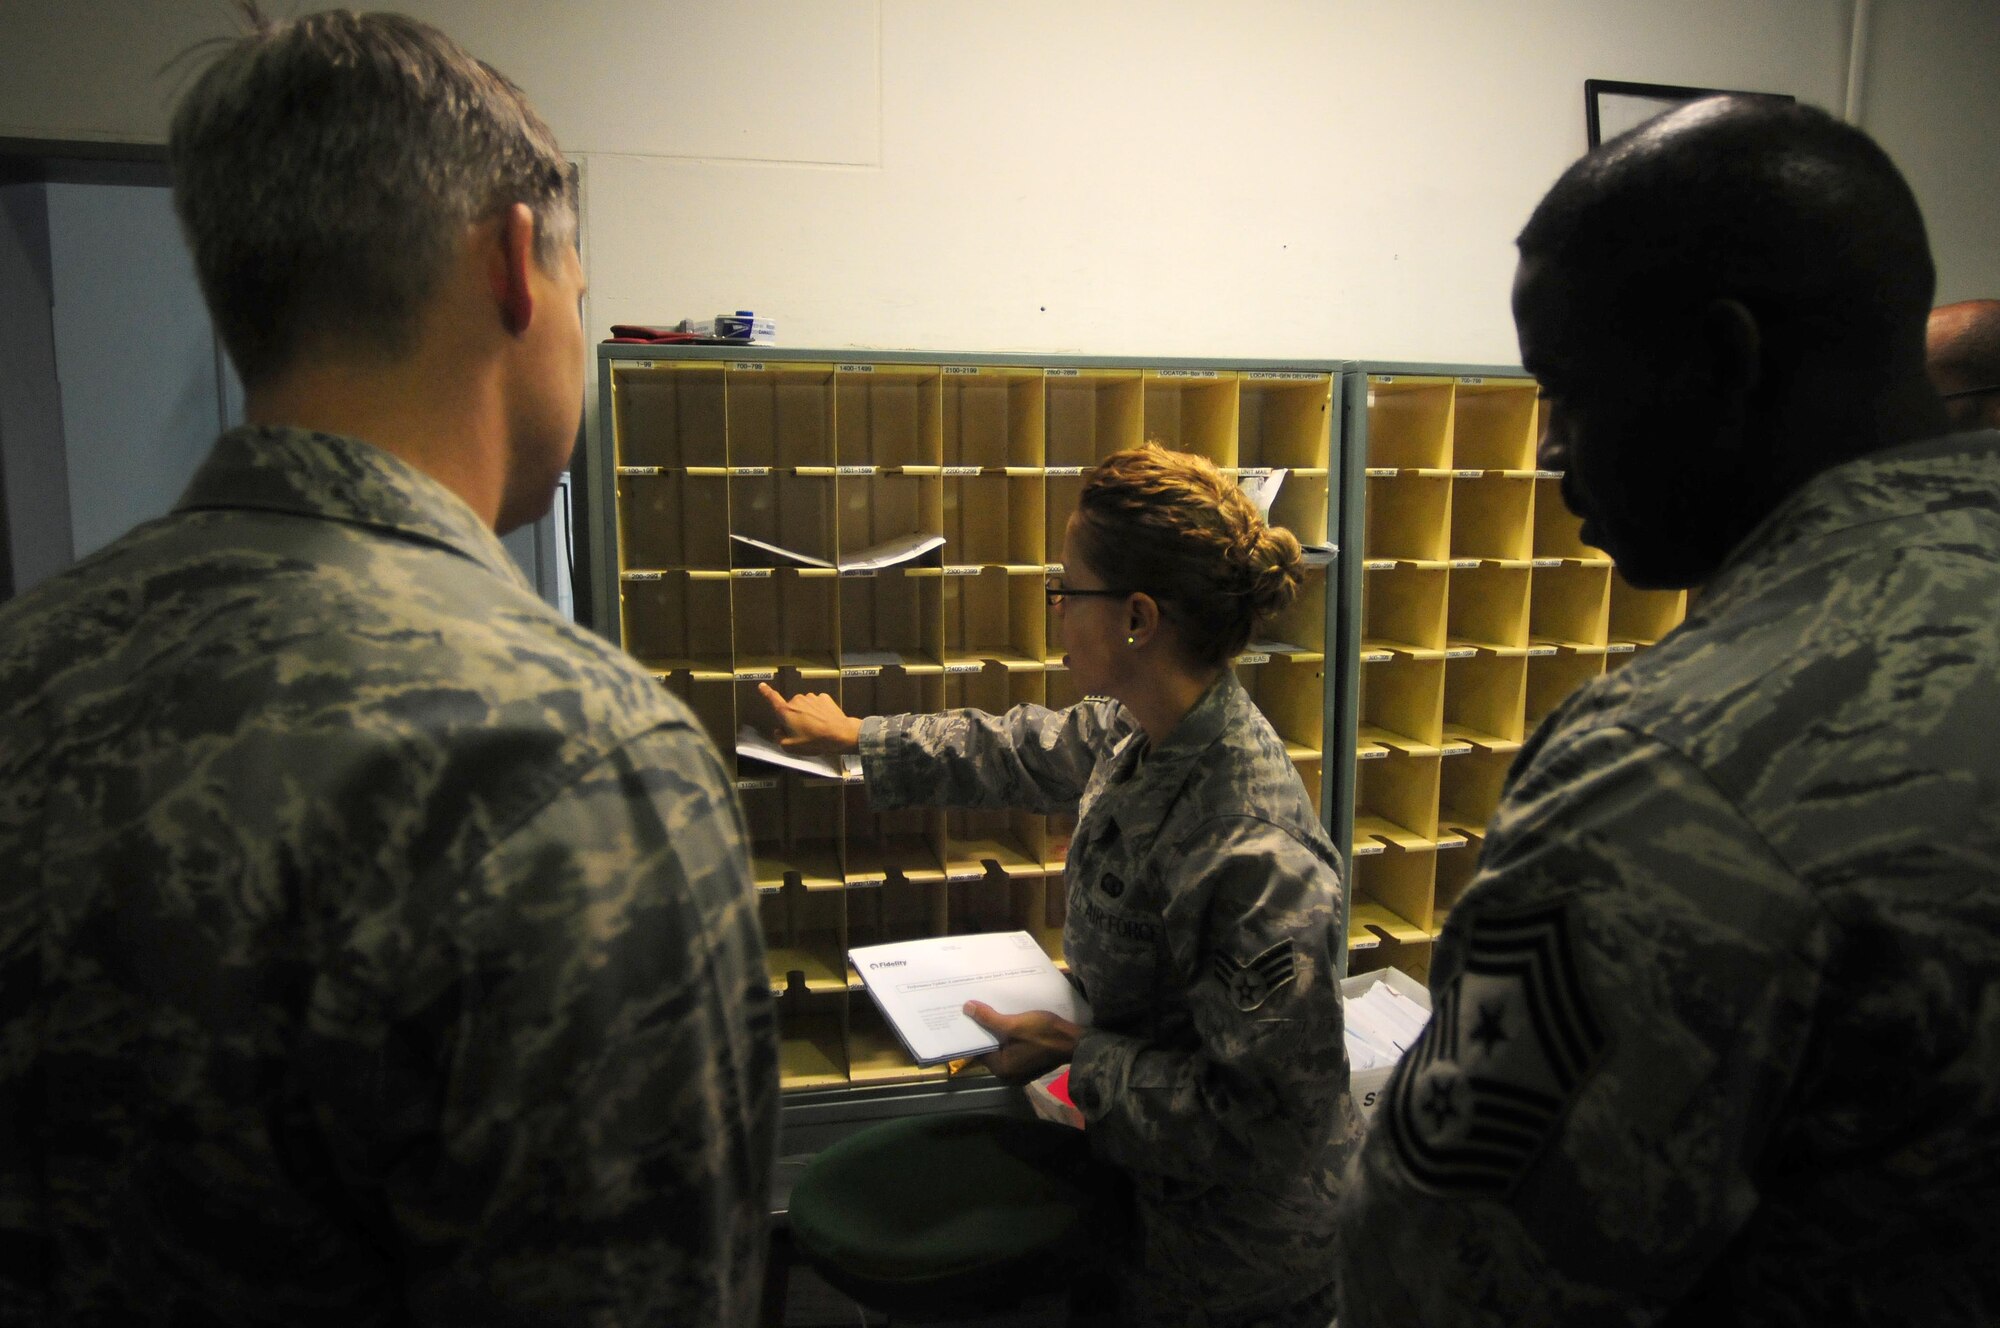 Senior Airman Nellie Bourdier, 39th Communications Squadron postal clerk, explains postal procedures to wing leadership Oct. 13, 2010 at Incirlik Air Base, Turkey.  The ODC processes approximately 900 packages each week and is often supported by volunteer assistance.  (U.S. Air Force photo by Senior Airman Ashley Wood/Released)